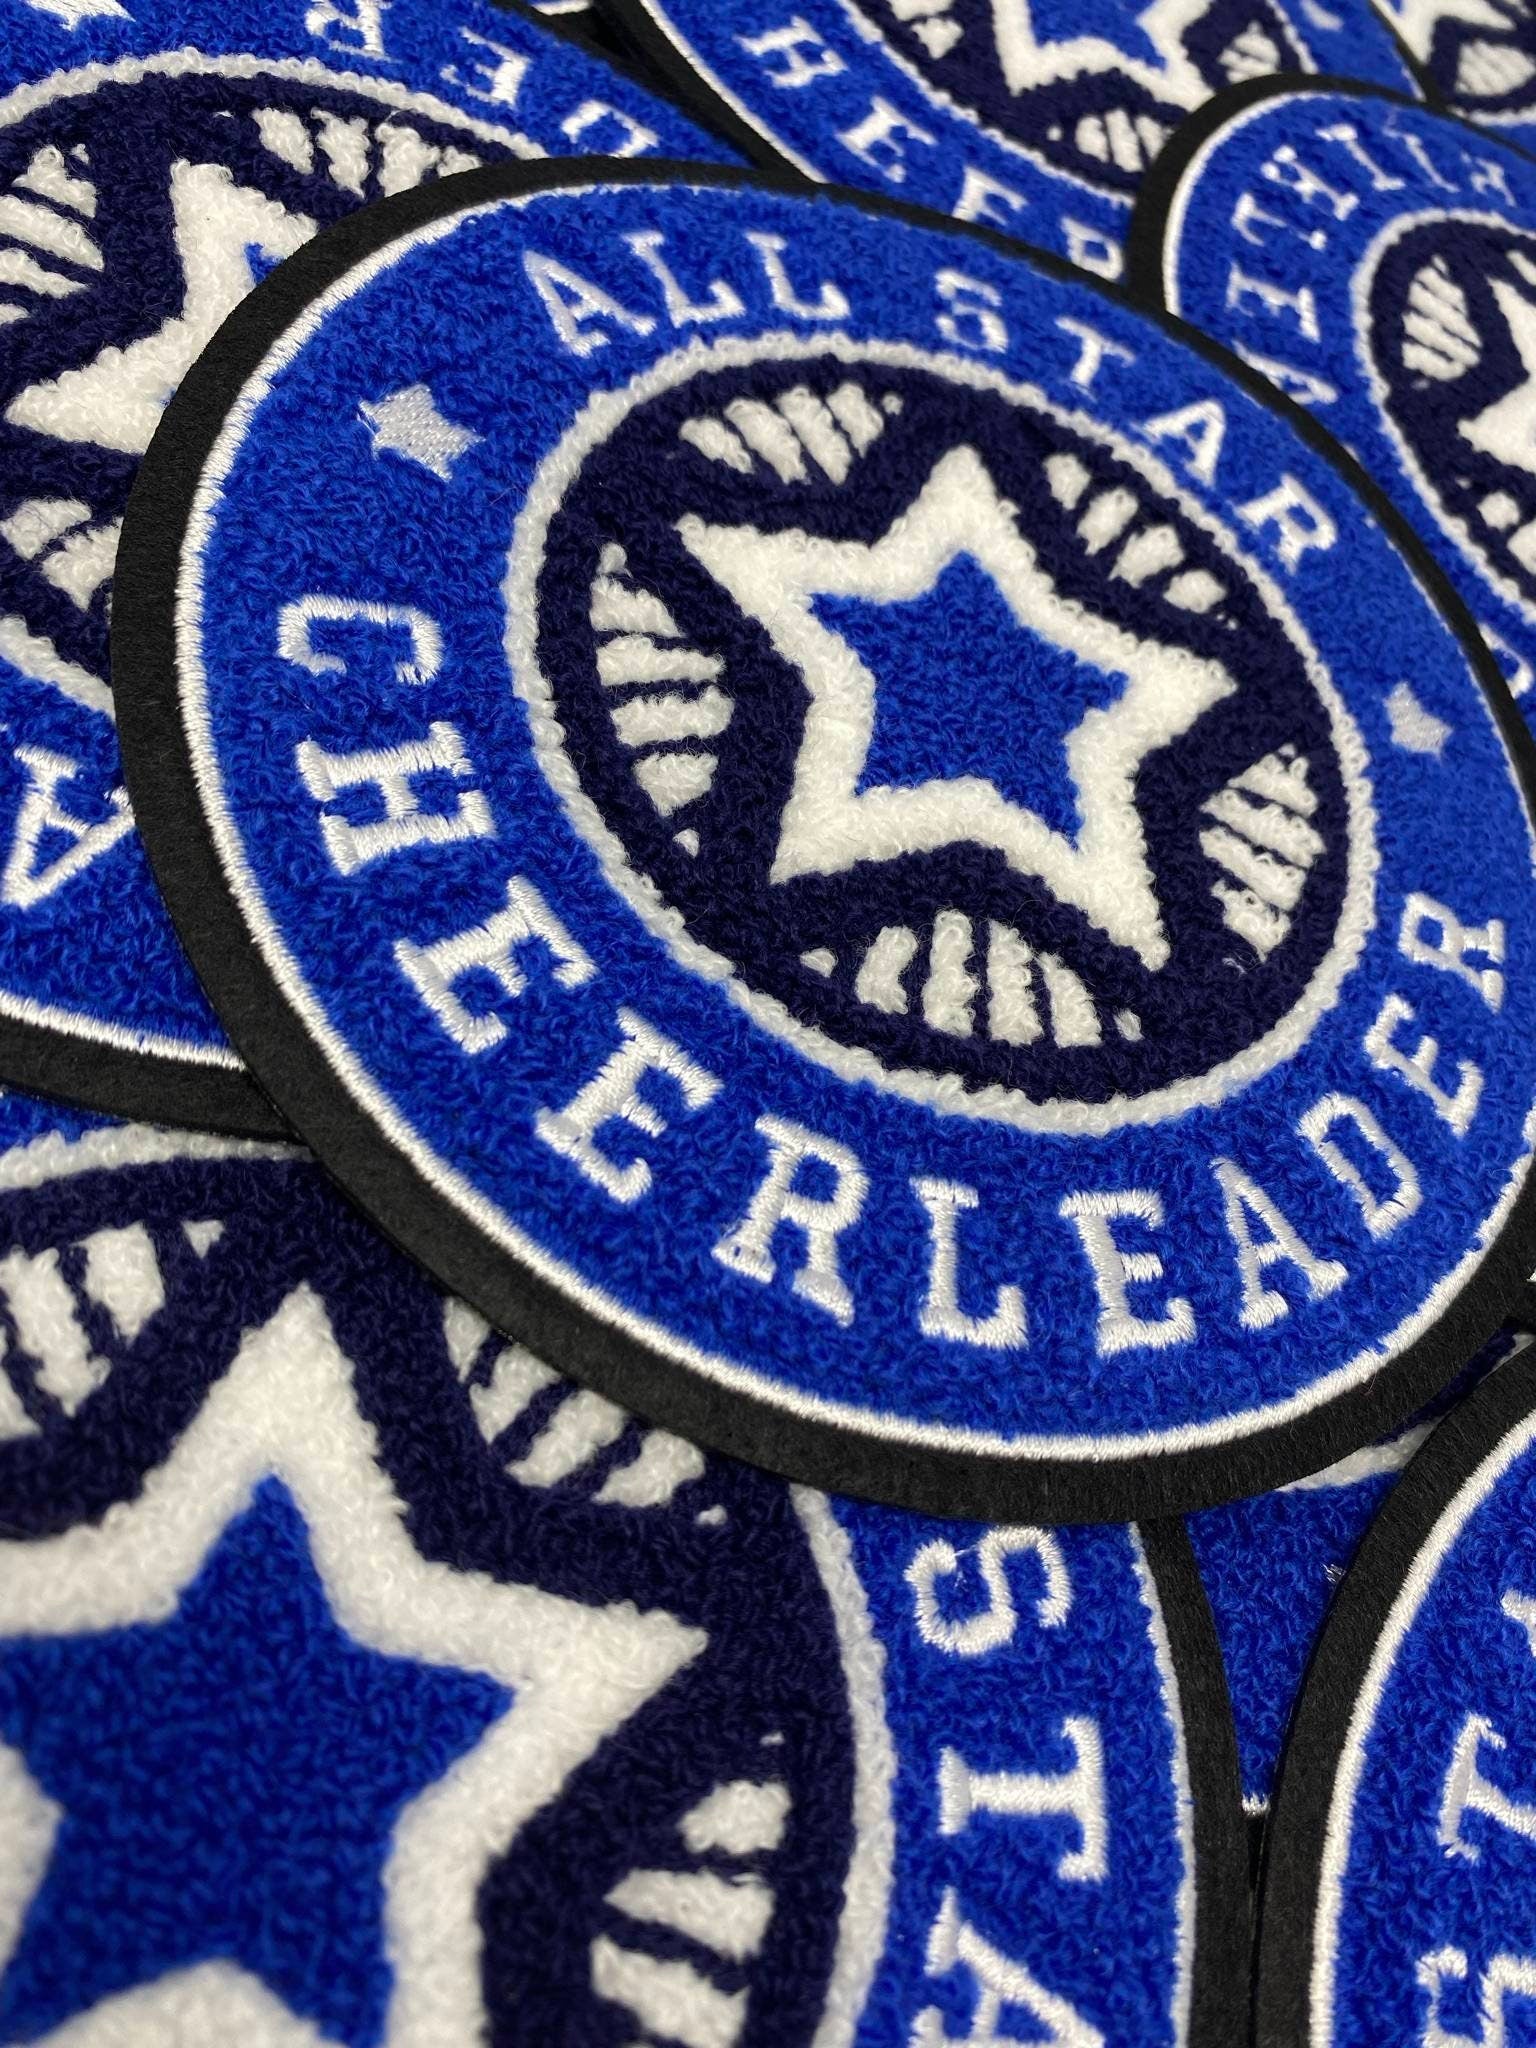 Chenille, "All-Star Cheerleader" Blue/White/Black Varsity Patch, Iron-on Applique for Jackets, Camo, Bags, Accessories, and DIY, Cheer Gift